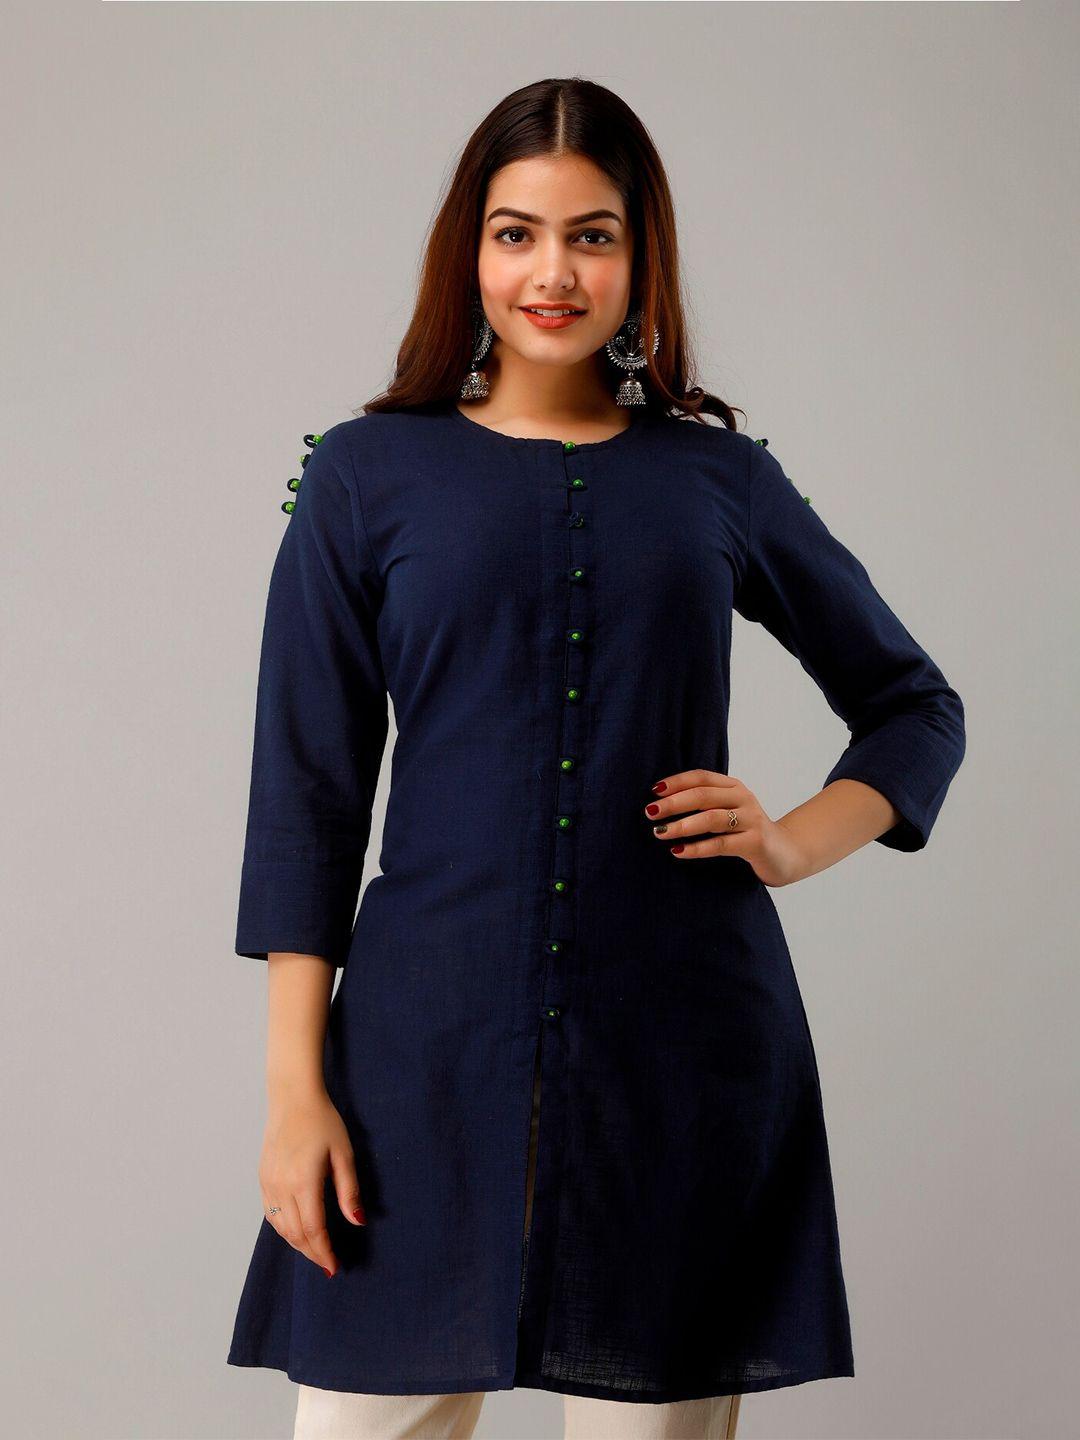 here&now navy blue front slit a-line kurti